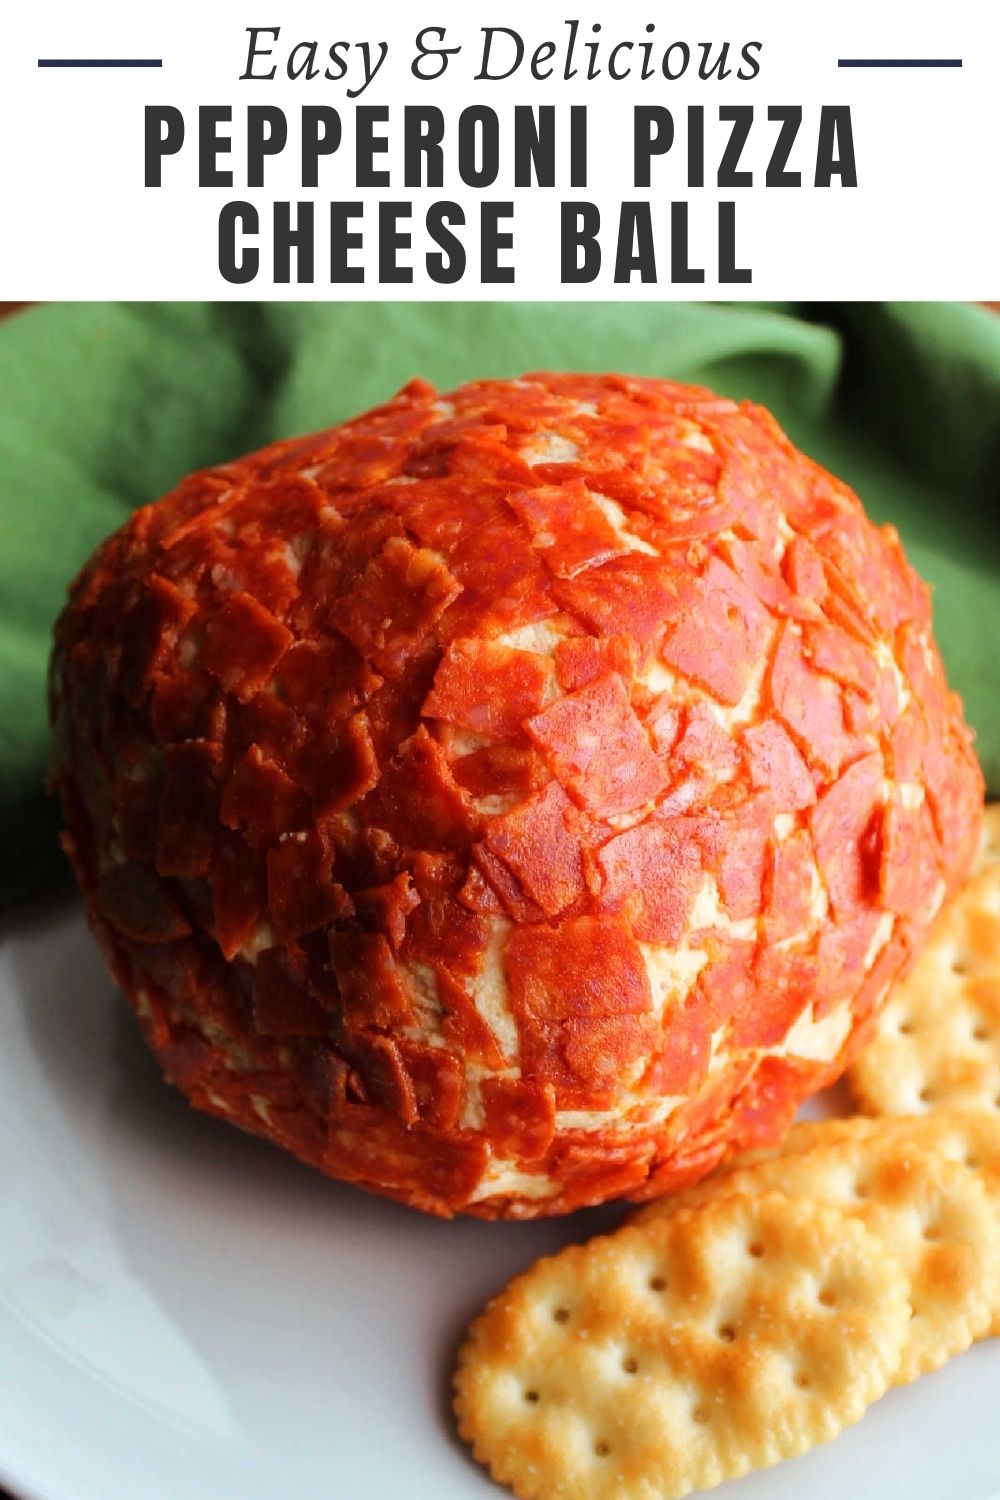 This cheese ball is full of pepperoni pizza flavor but in a fun, spreadable appetizer form! It is sure to be a hit at your next party and would be great at a tailgate!